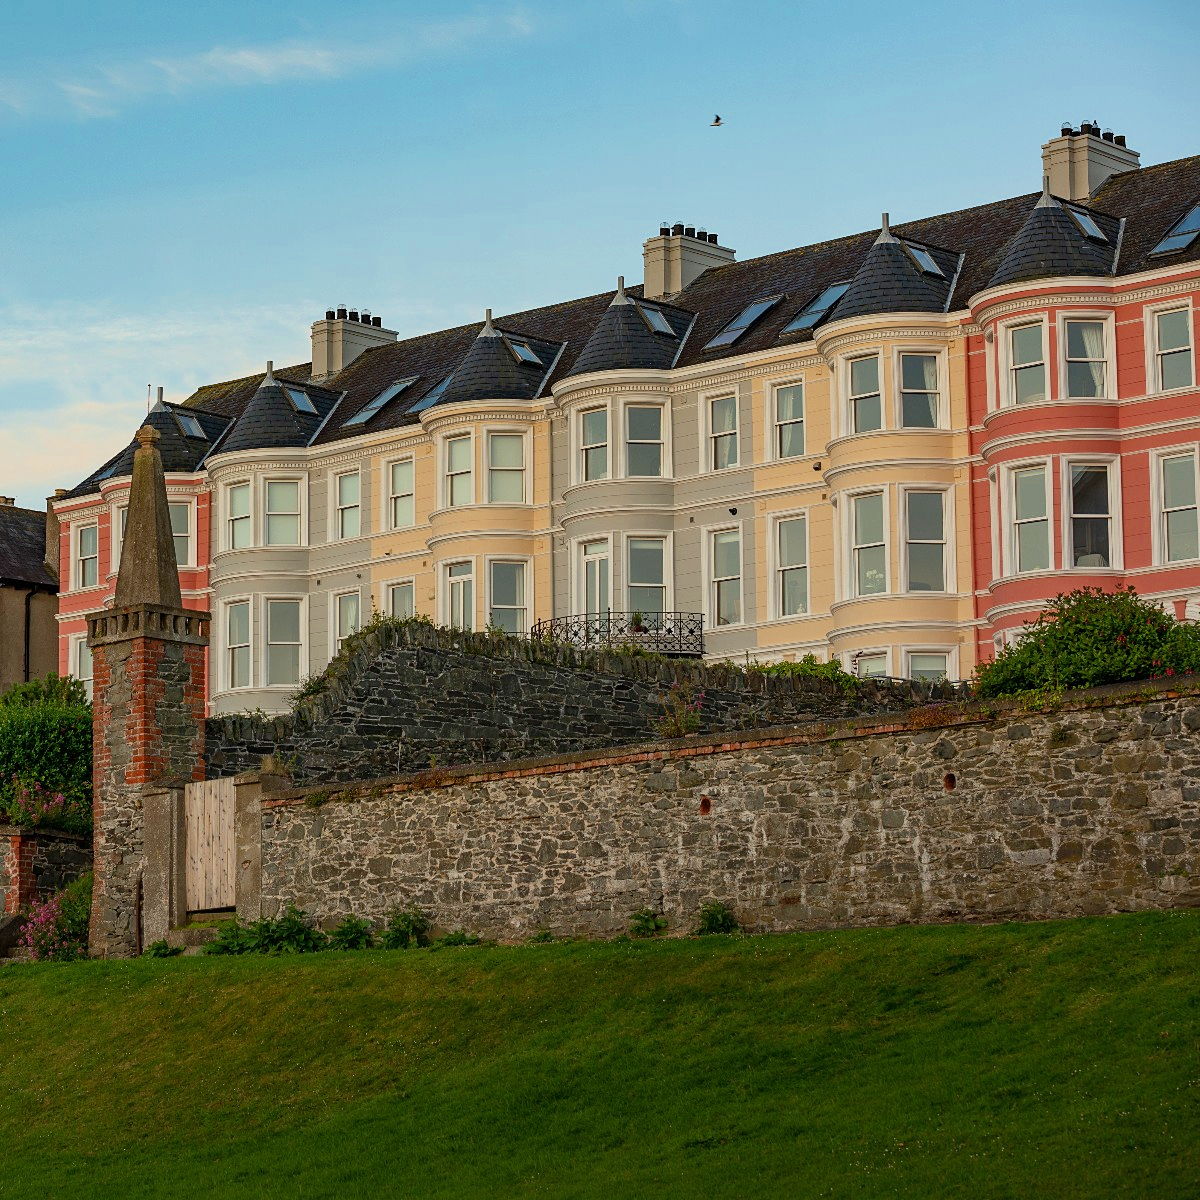 Colourful houses in Bangor